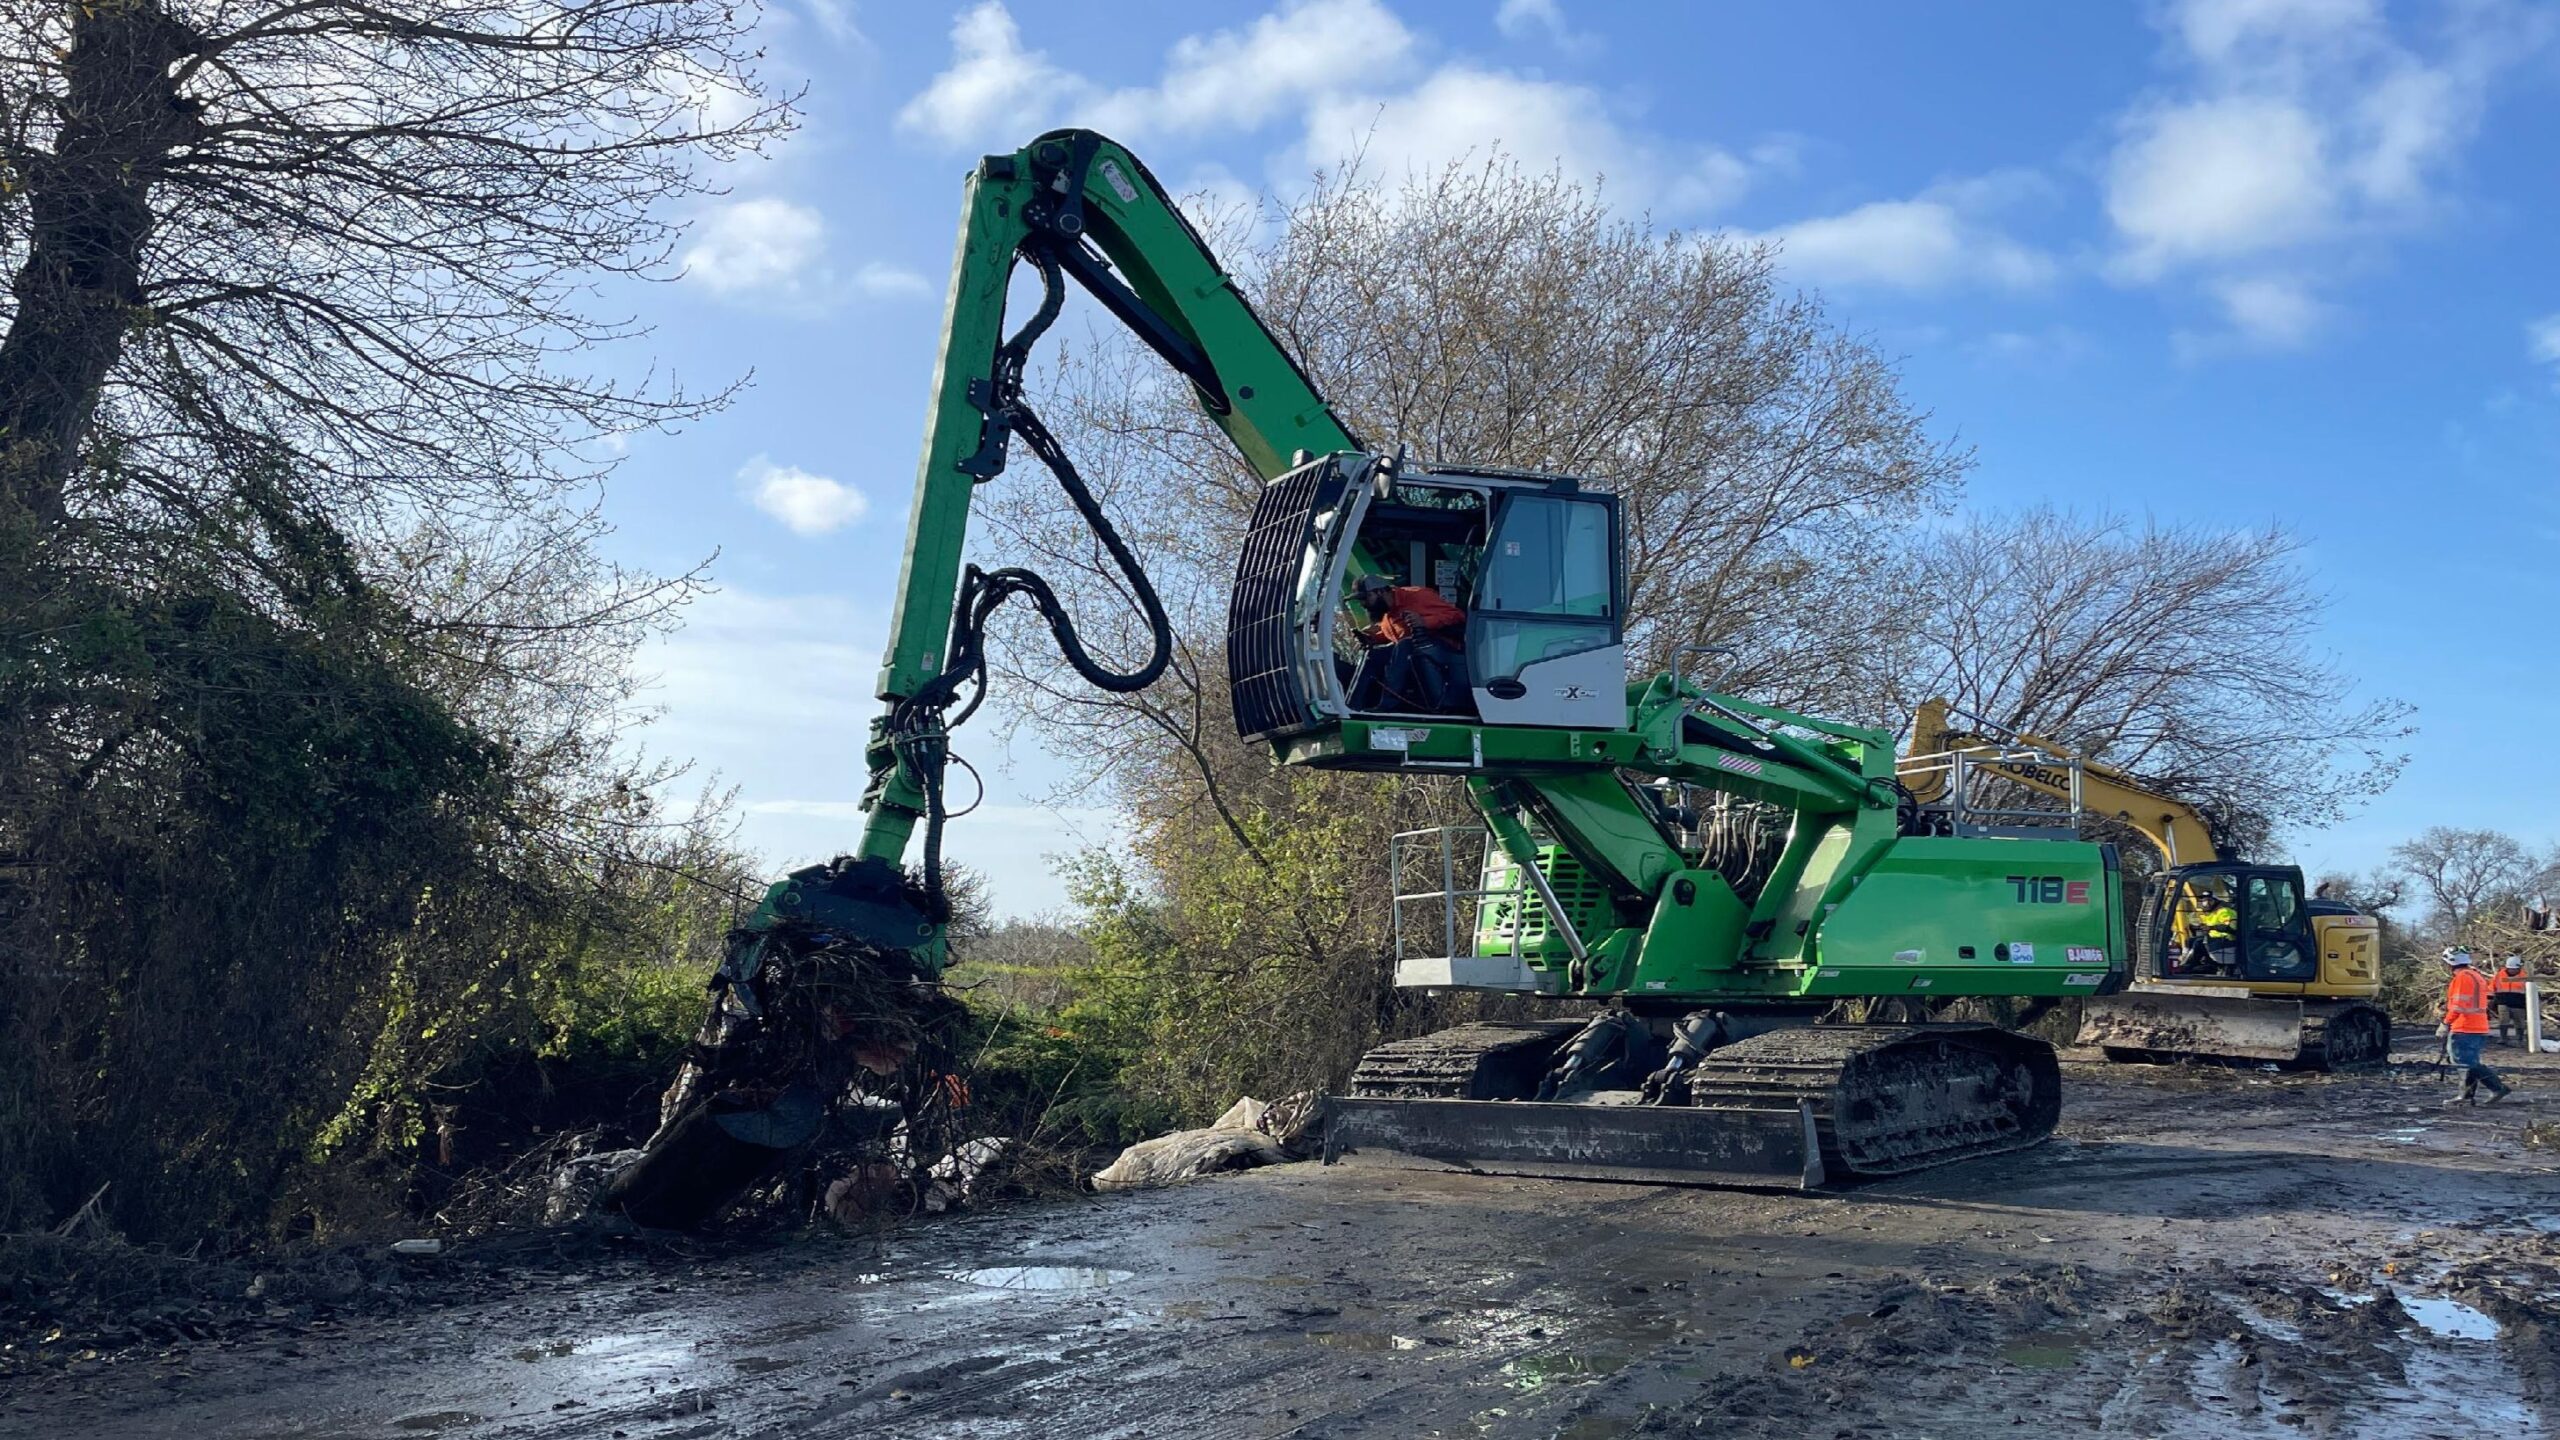 A heavy-duty machine scraped the streambed on a tributary of the Pajaro River in preparation for anticipated winter storms.